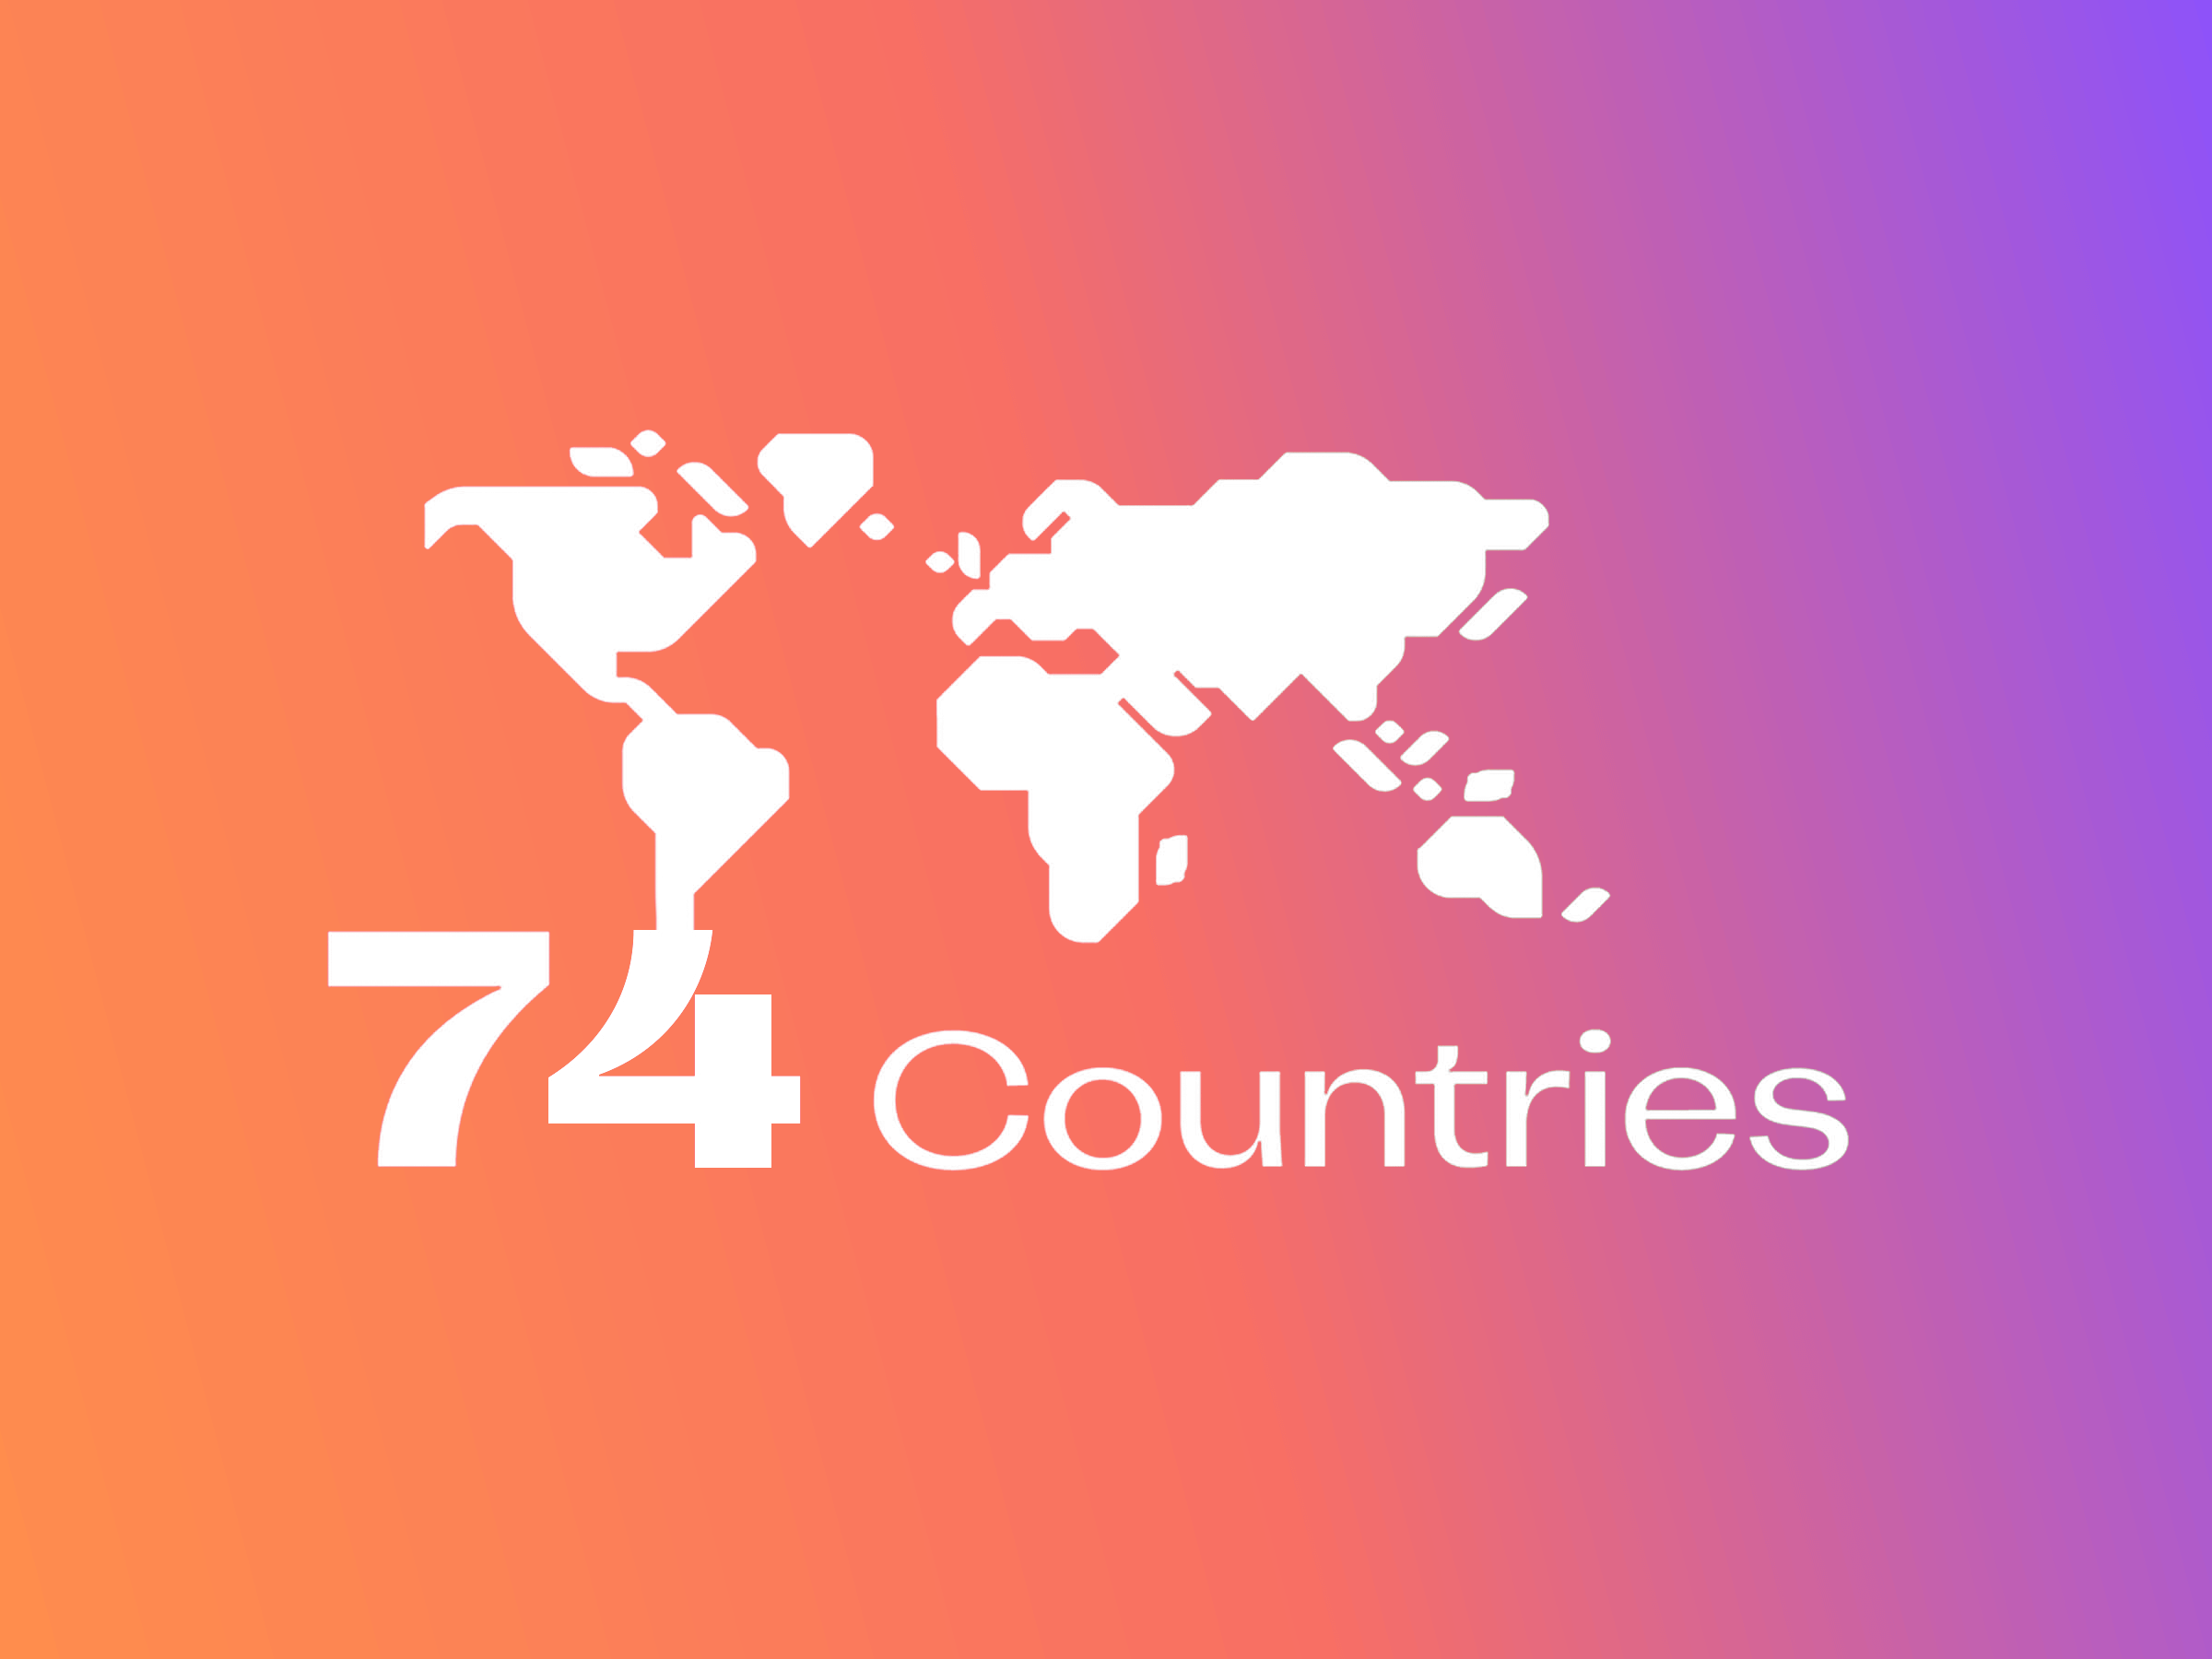 74 countries